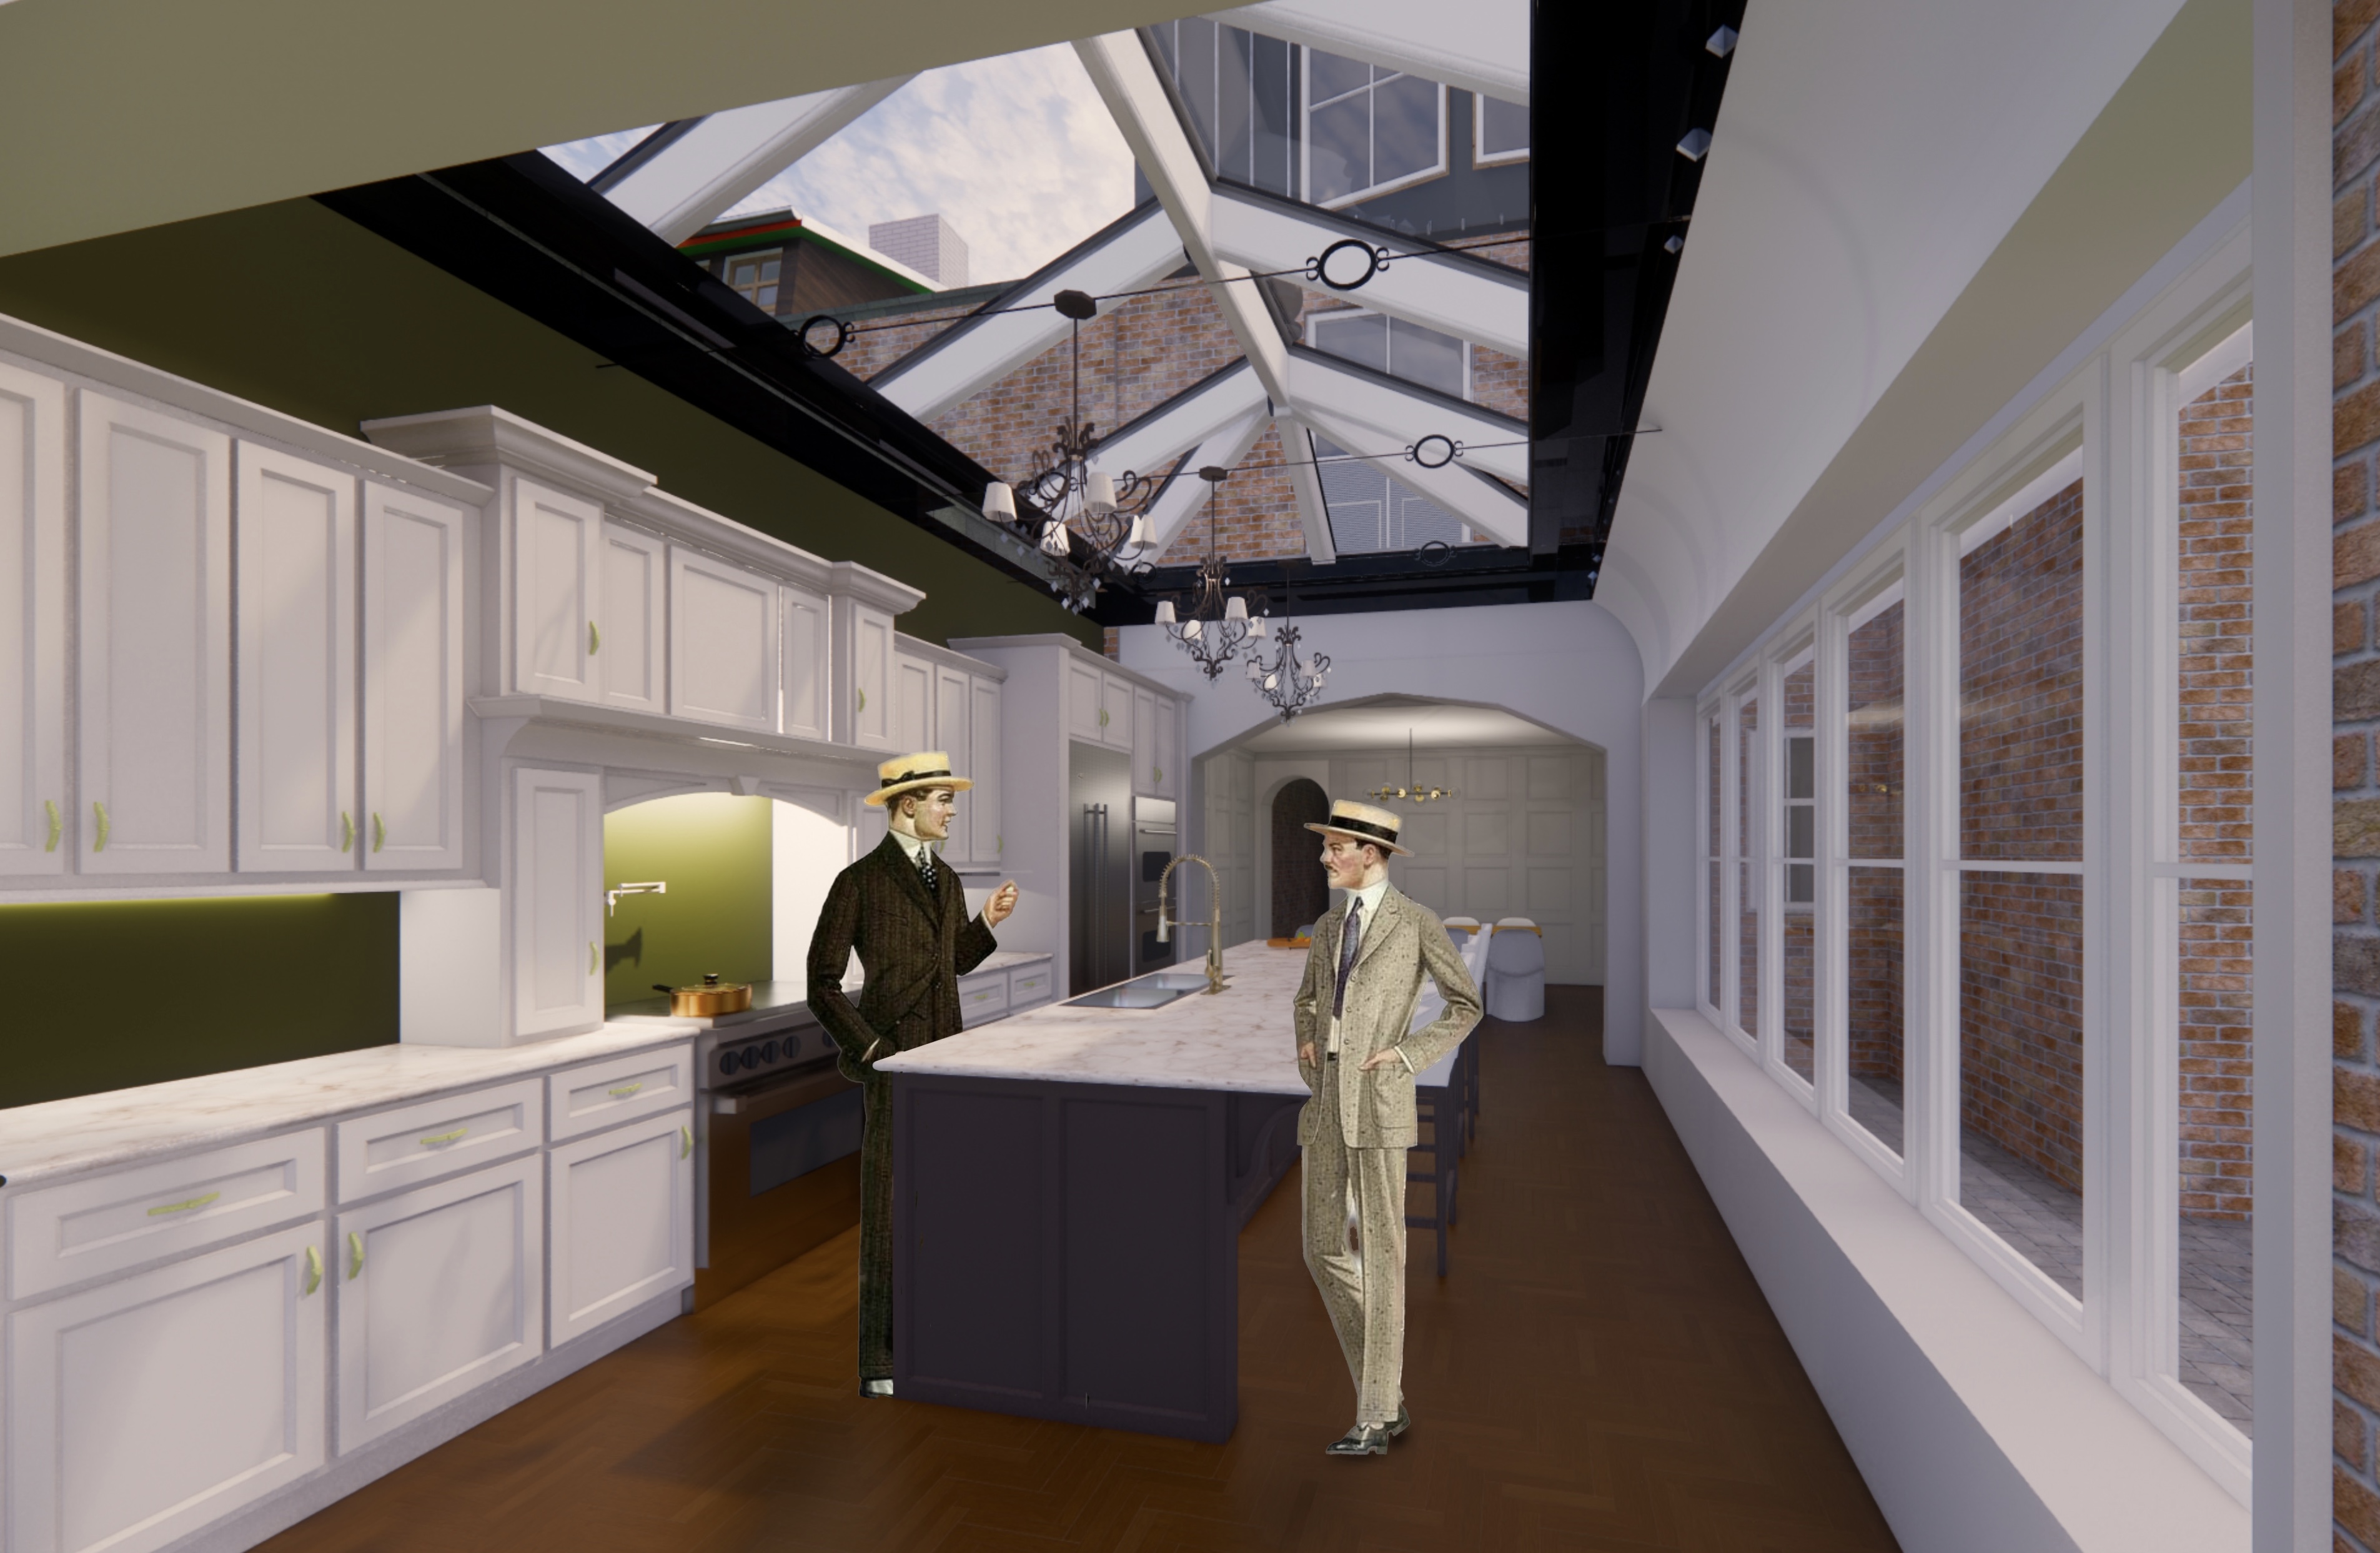 Rendering by Albert Jaime of the kitchen in The Efficient Edwardian. Two men in Edwardian dress stand talking in a contemporary kitchen with Edwardian aesthetic details.